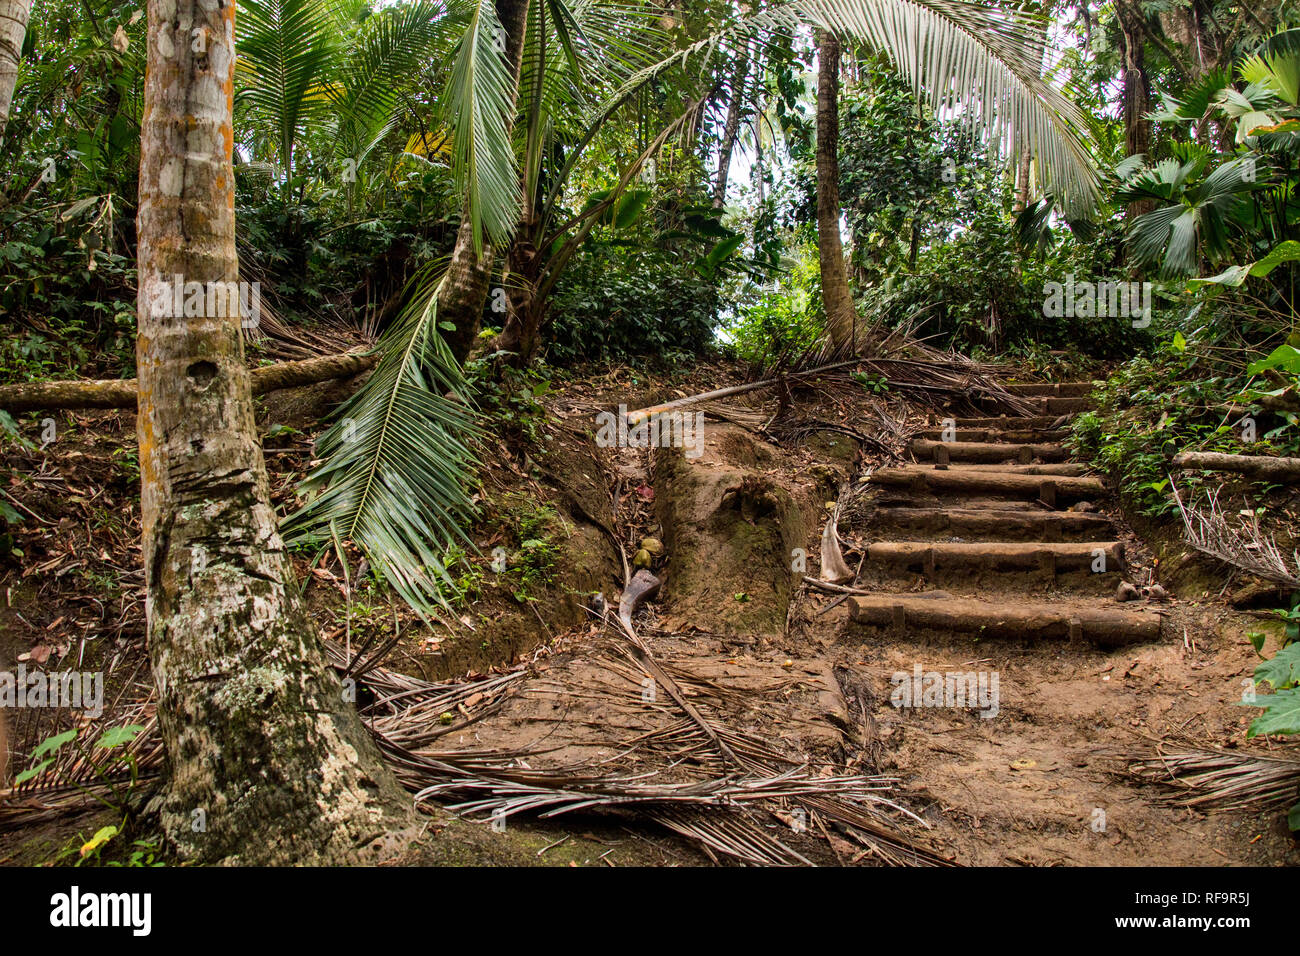 A scenic landscape photo of a ancient looking pathway with stairs in a beautiful rain forest of Manzanillo National Park, Costa Rica Stock Photo